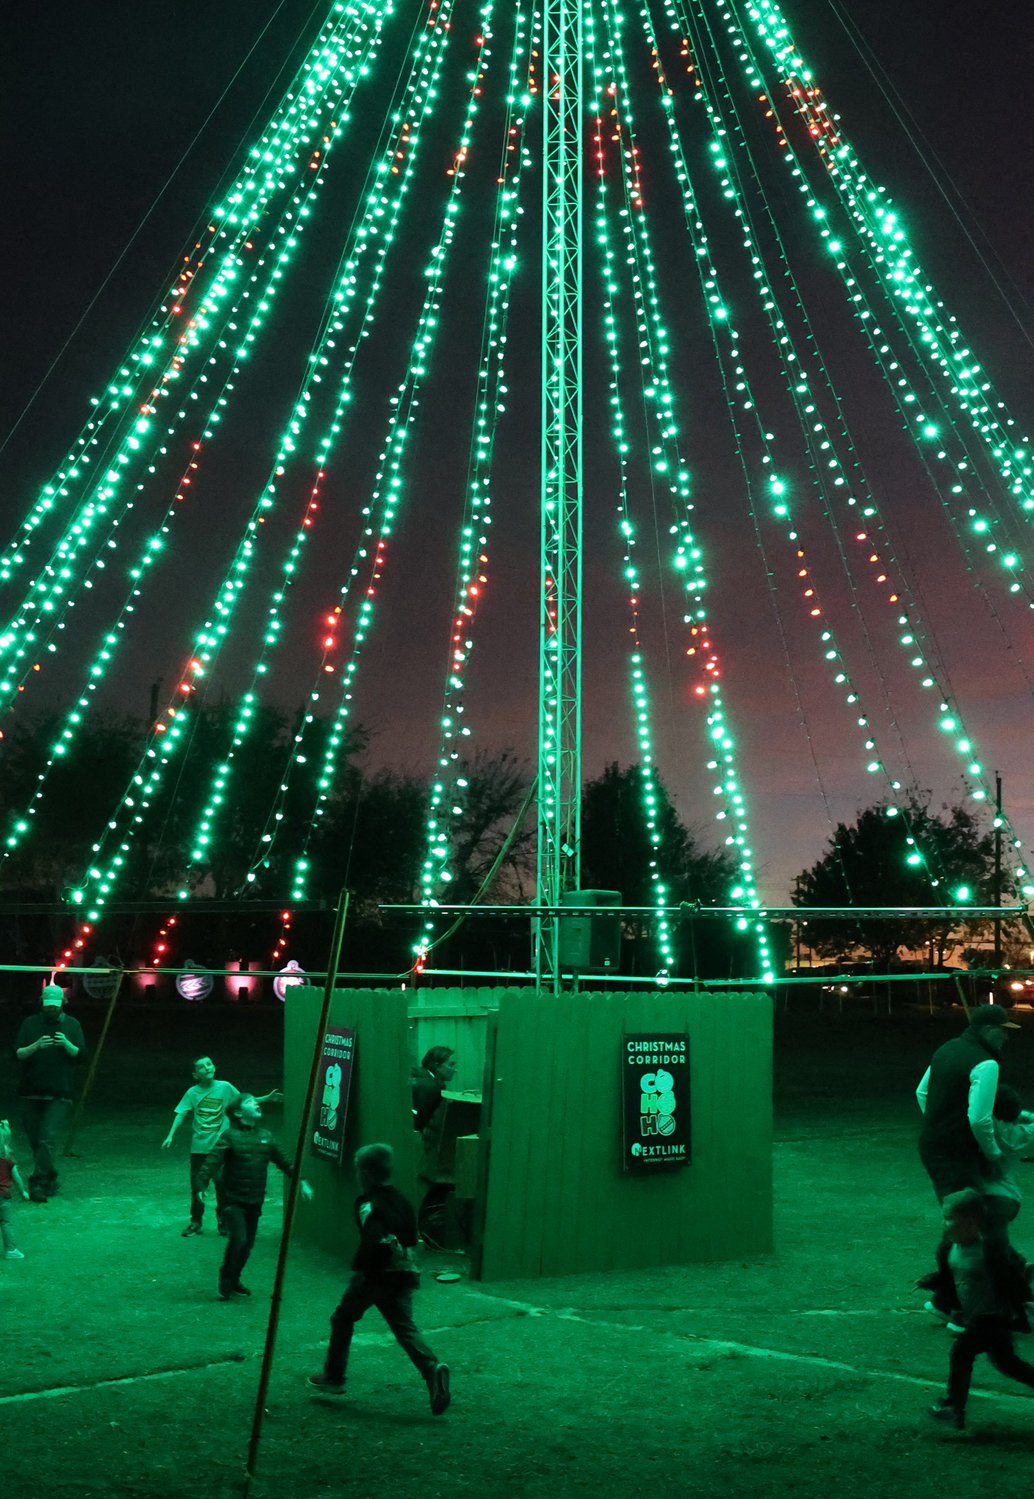 Children frolick amid the giant Christmas tree of light in the middle of Gene Voyles Park.